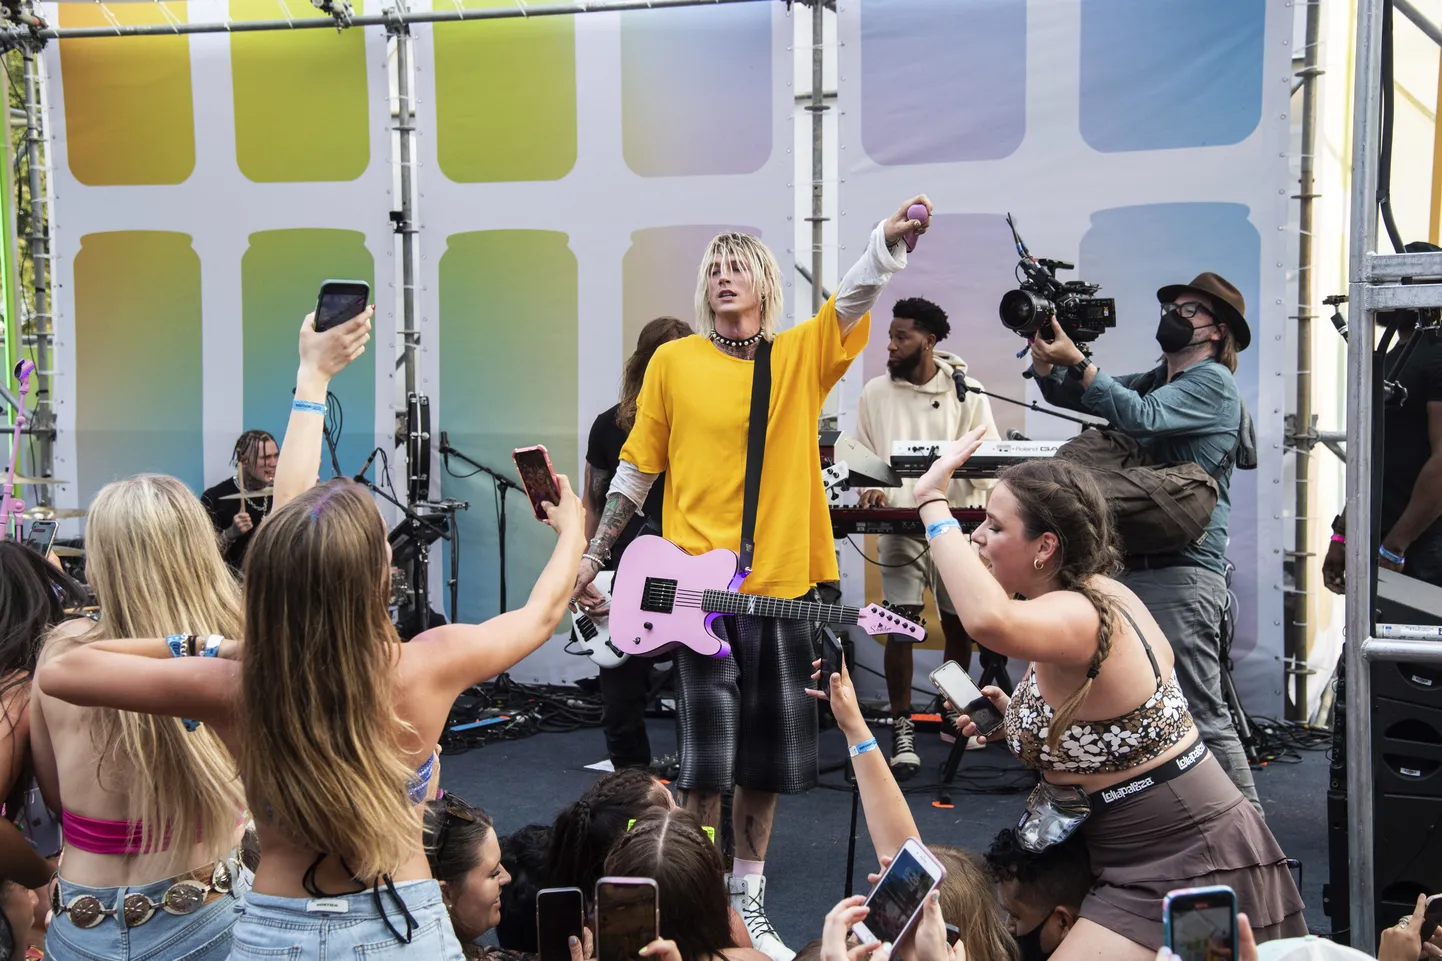 Machine Gun Kelly performs a surprise set on the Bud Light Seltzer Sessions stage on Day 3 of the Lollapalooza Music Festival on Saturday, July 31, 2021, at Grant Park in Chicago. (Photo by Amy Harris/Invision/AP)